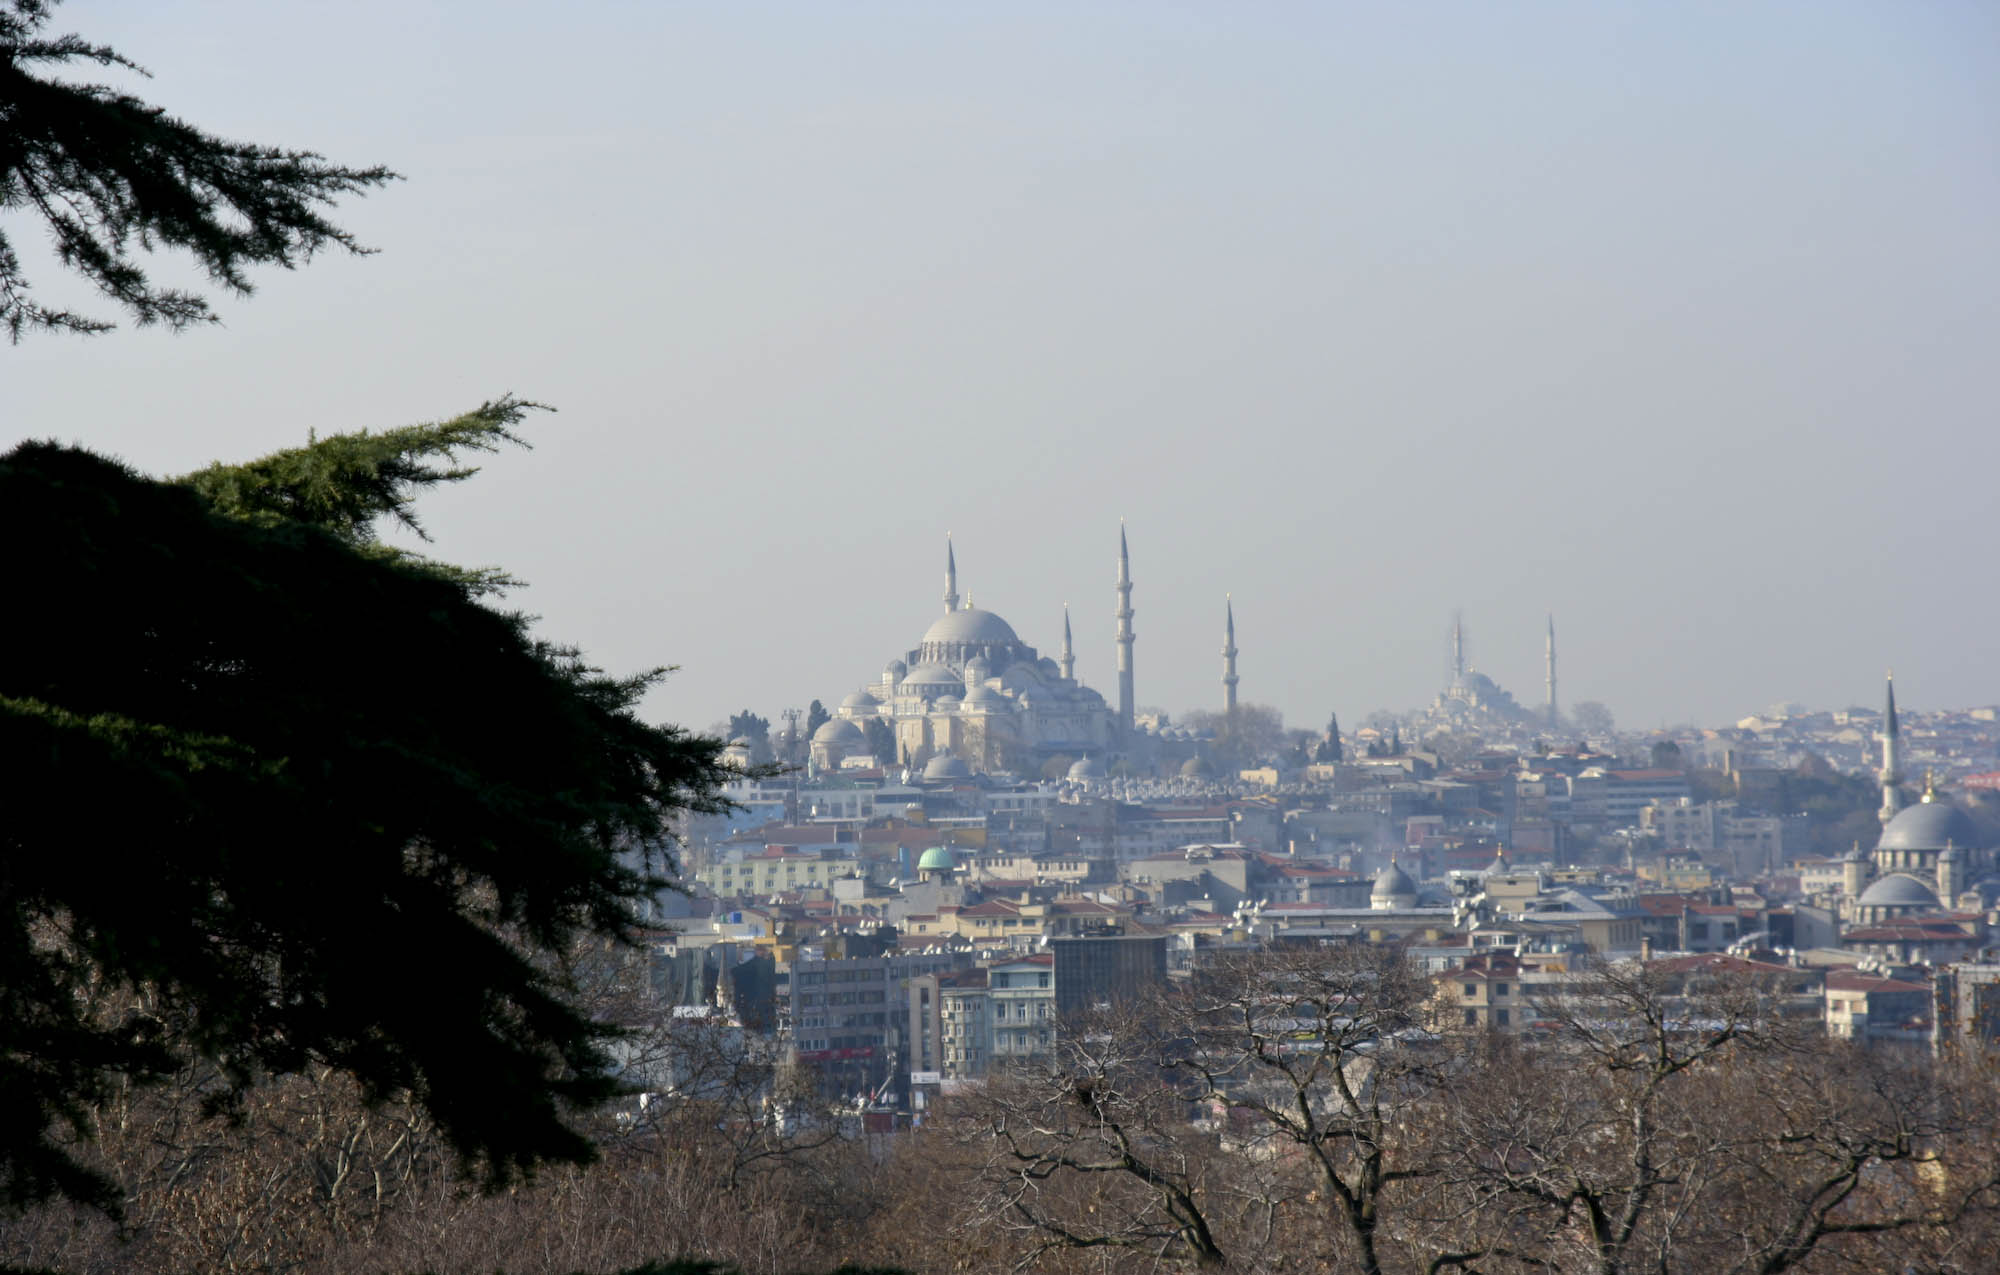 Quotes From The Trip: Istanbul